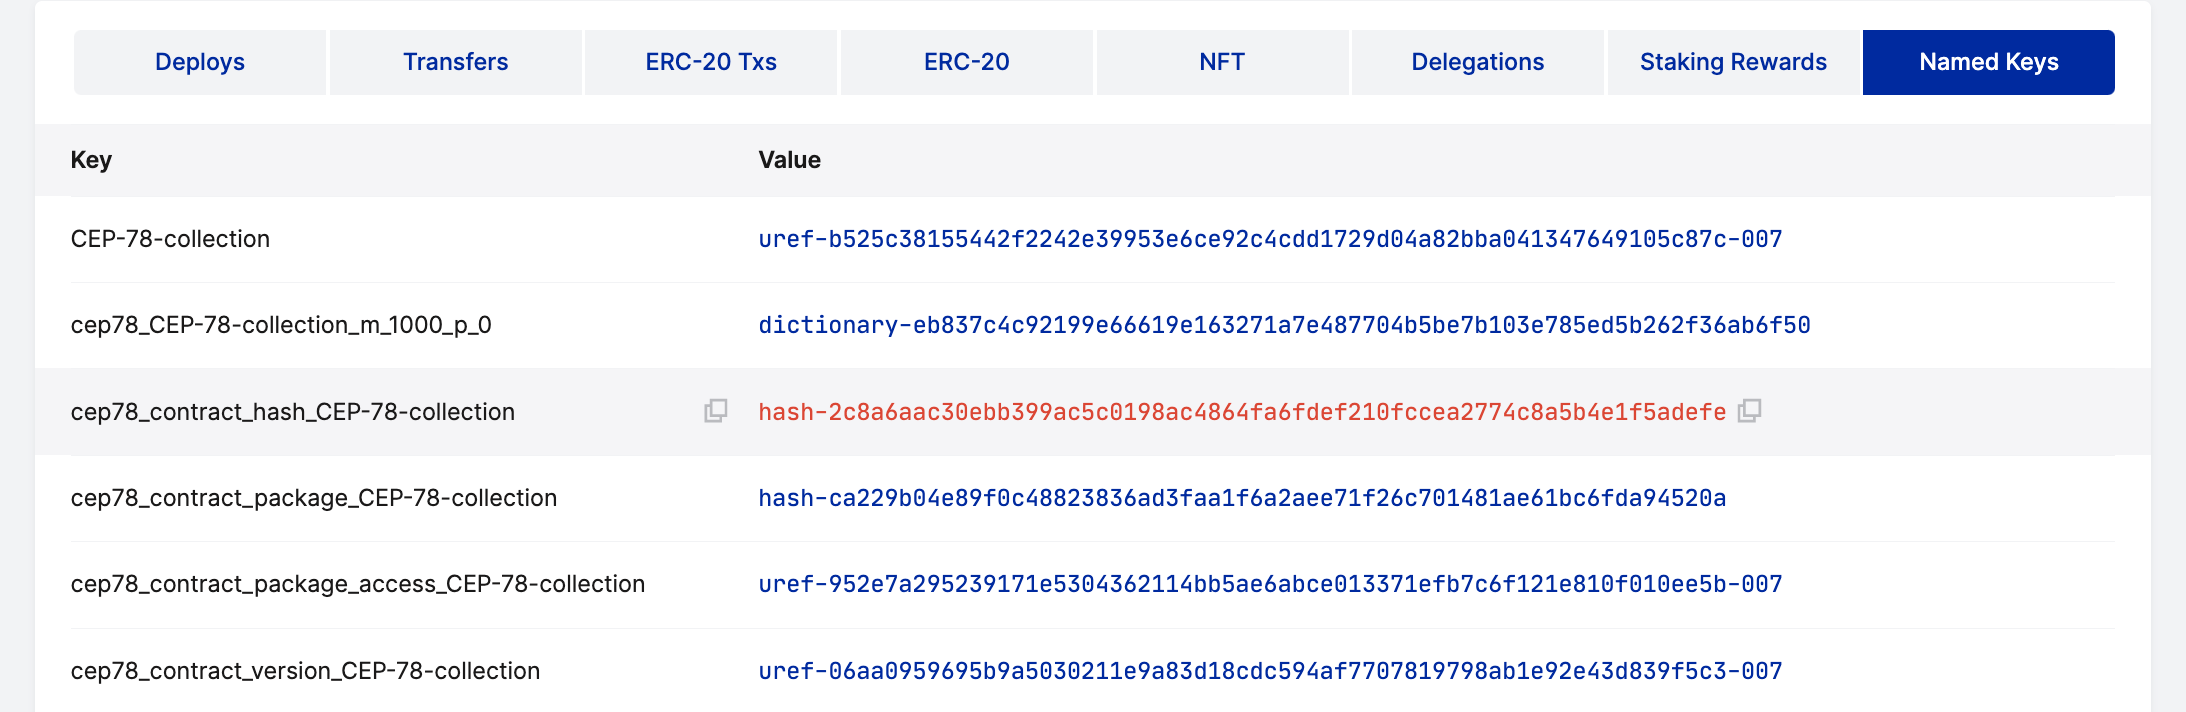 The NFT contract hash